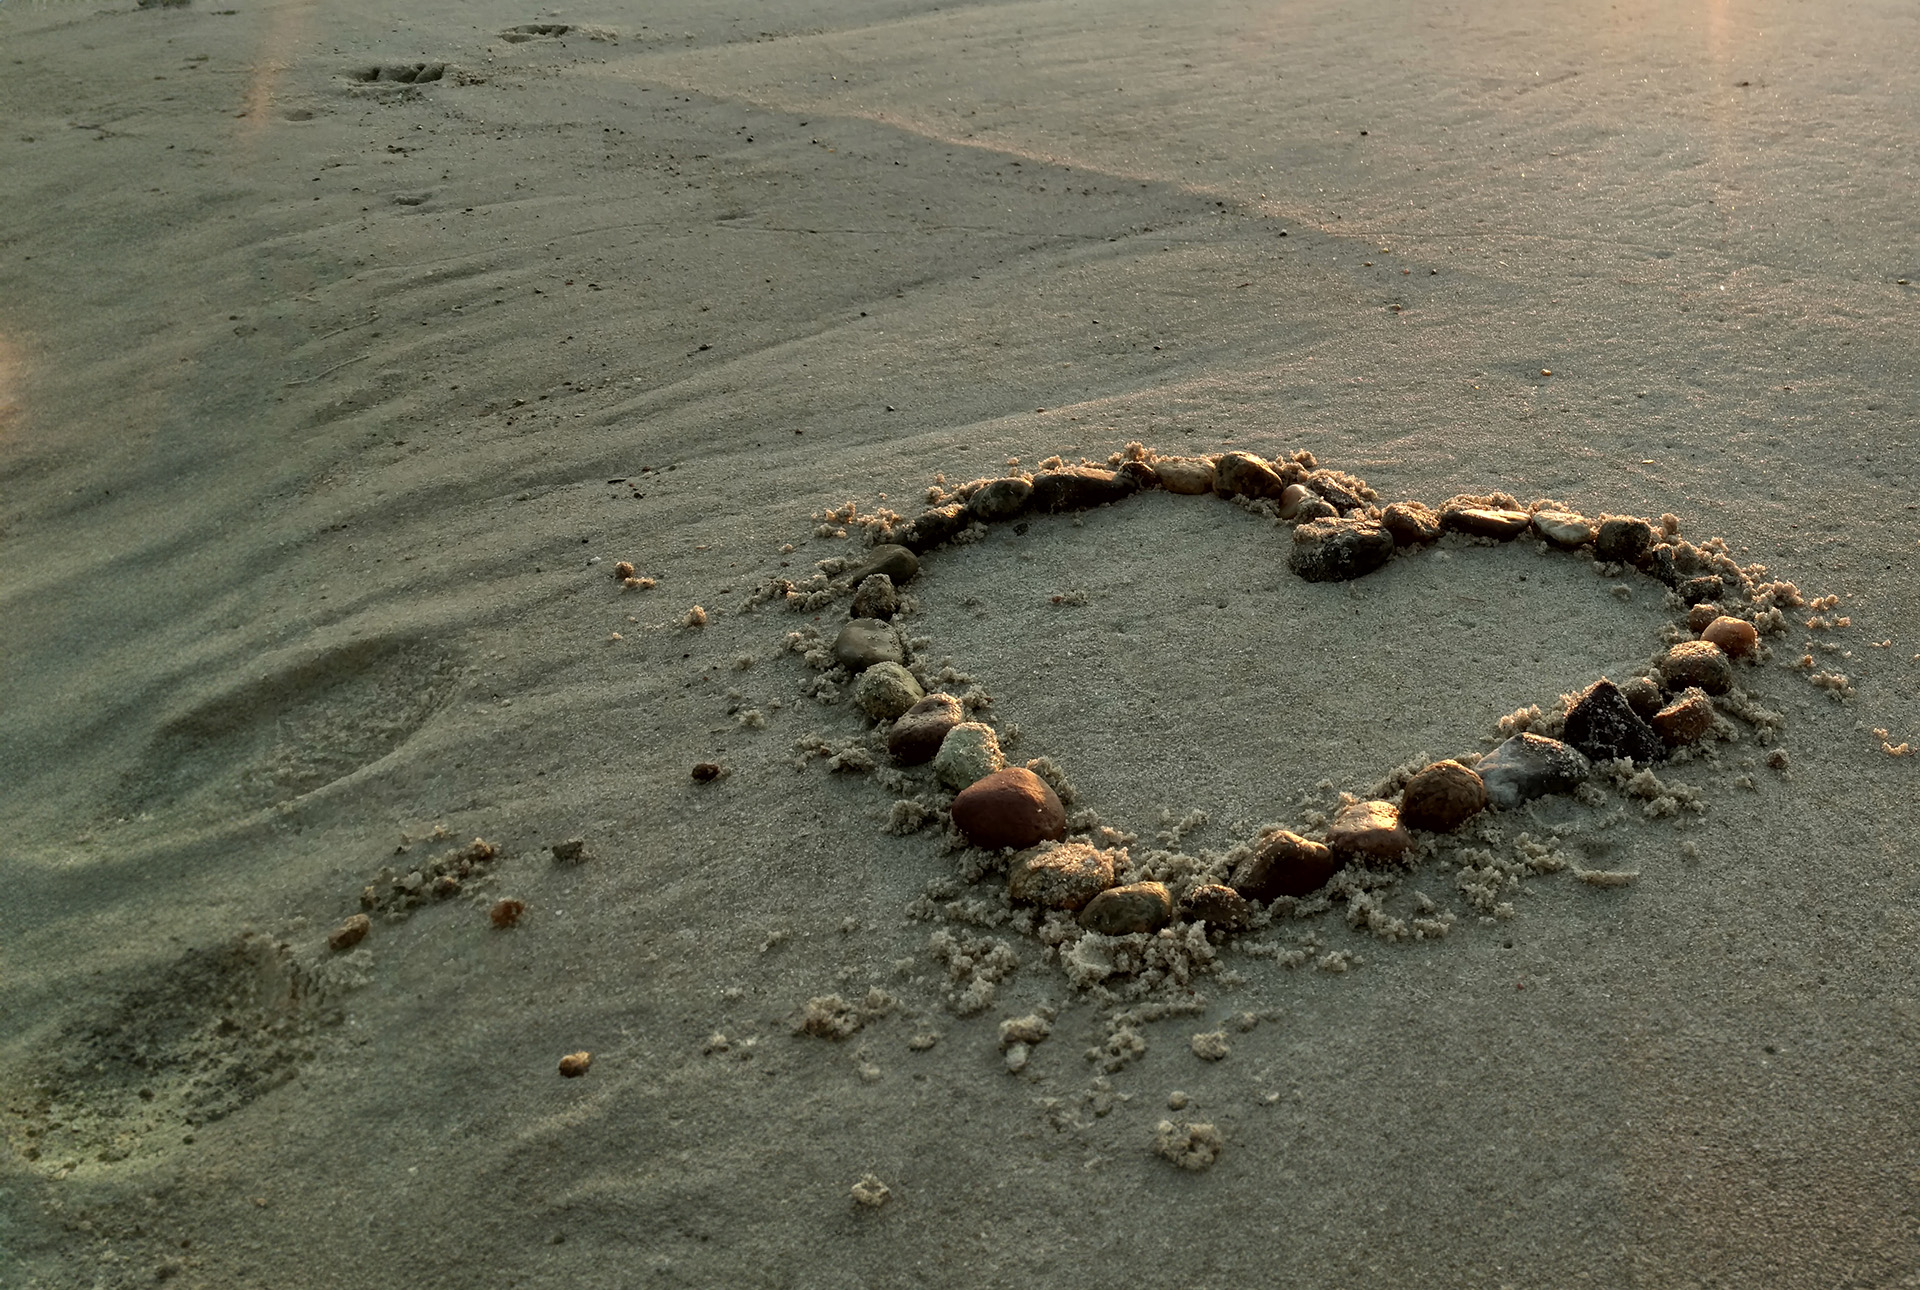 Heart made of rocks in the sand